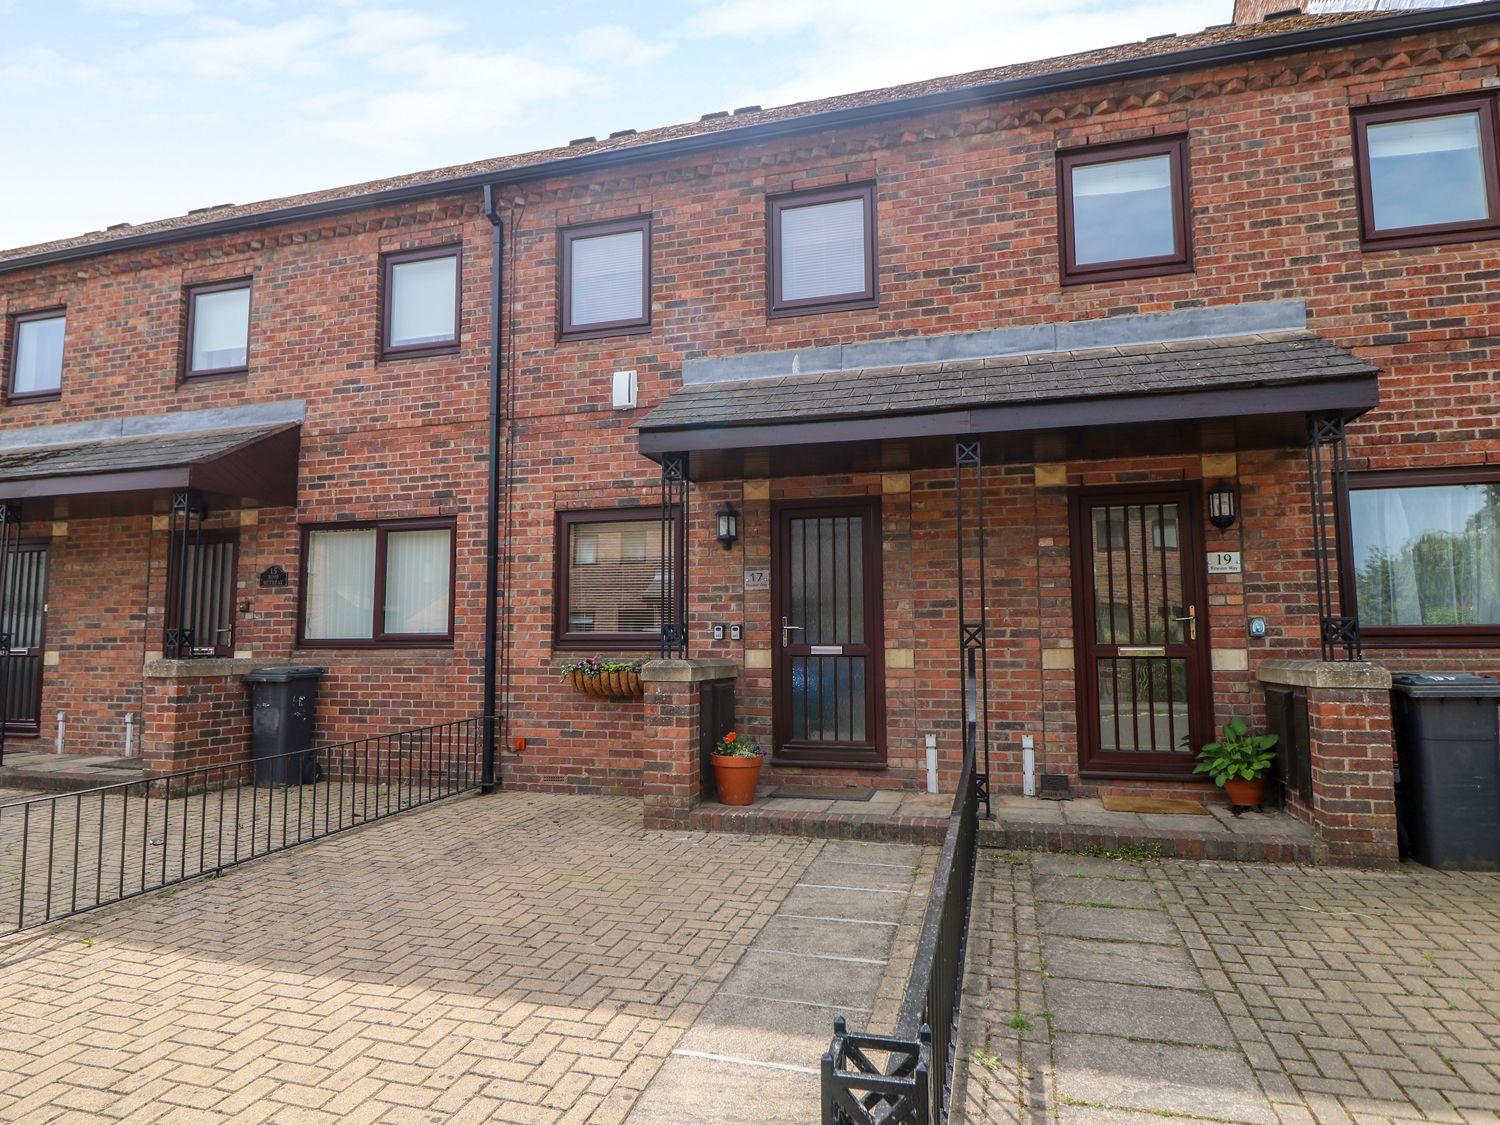 17 Fewster Way - North Yorkshire (incl. Whitby) - 999118 - photo 1